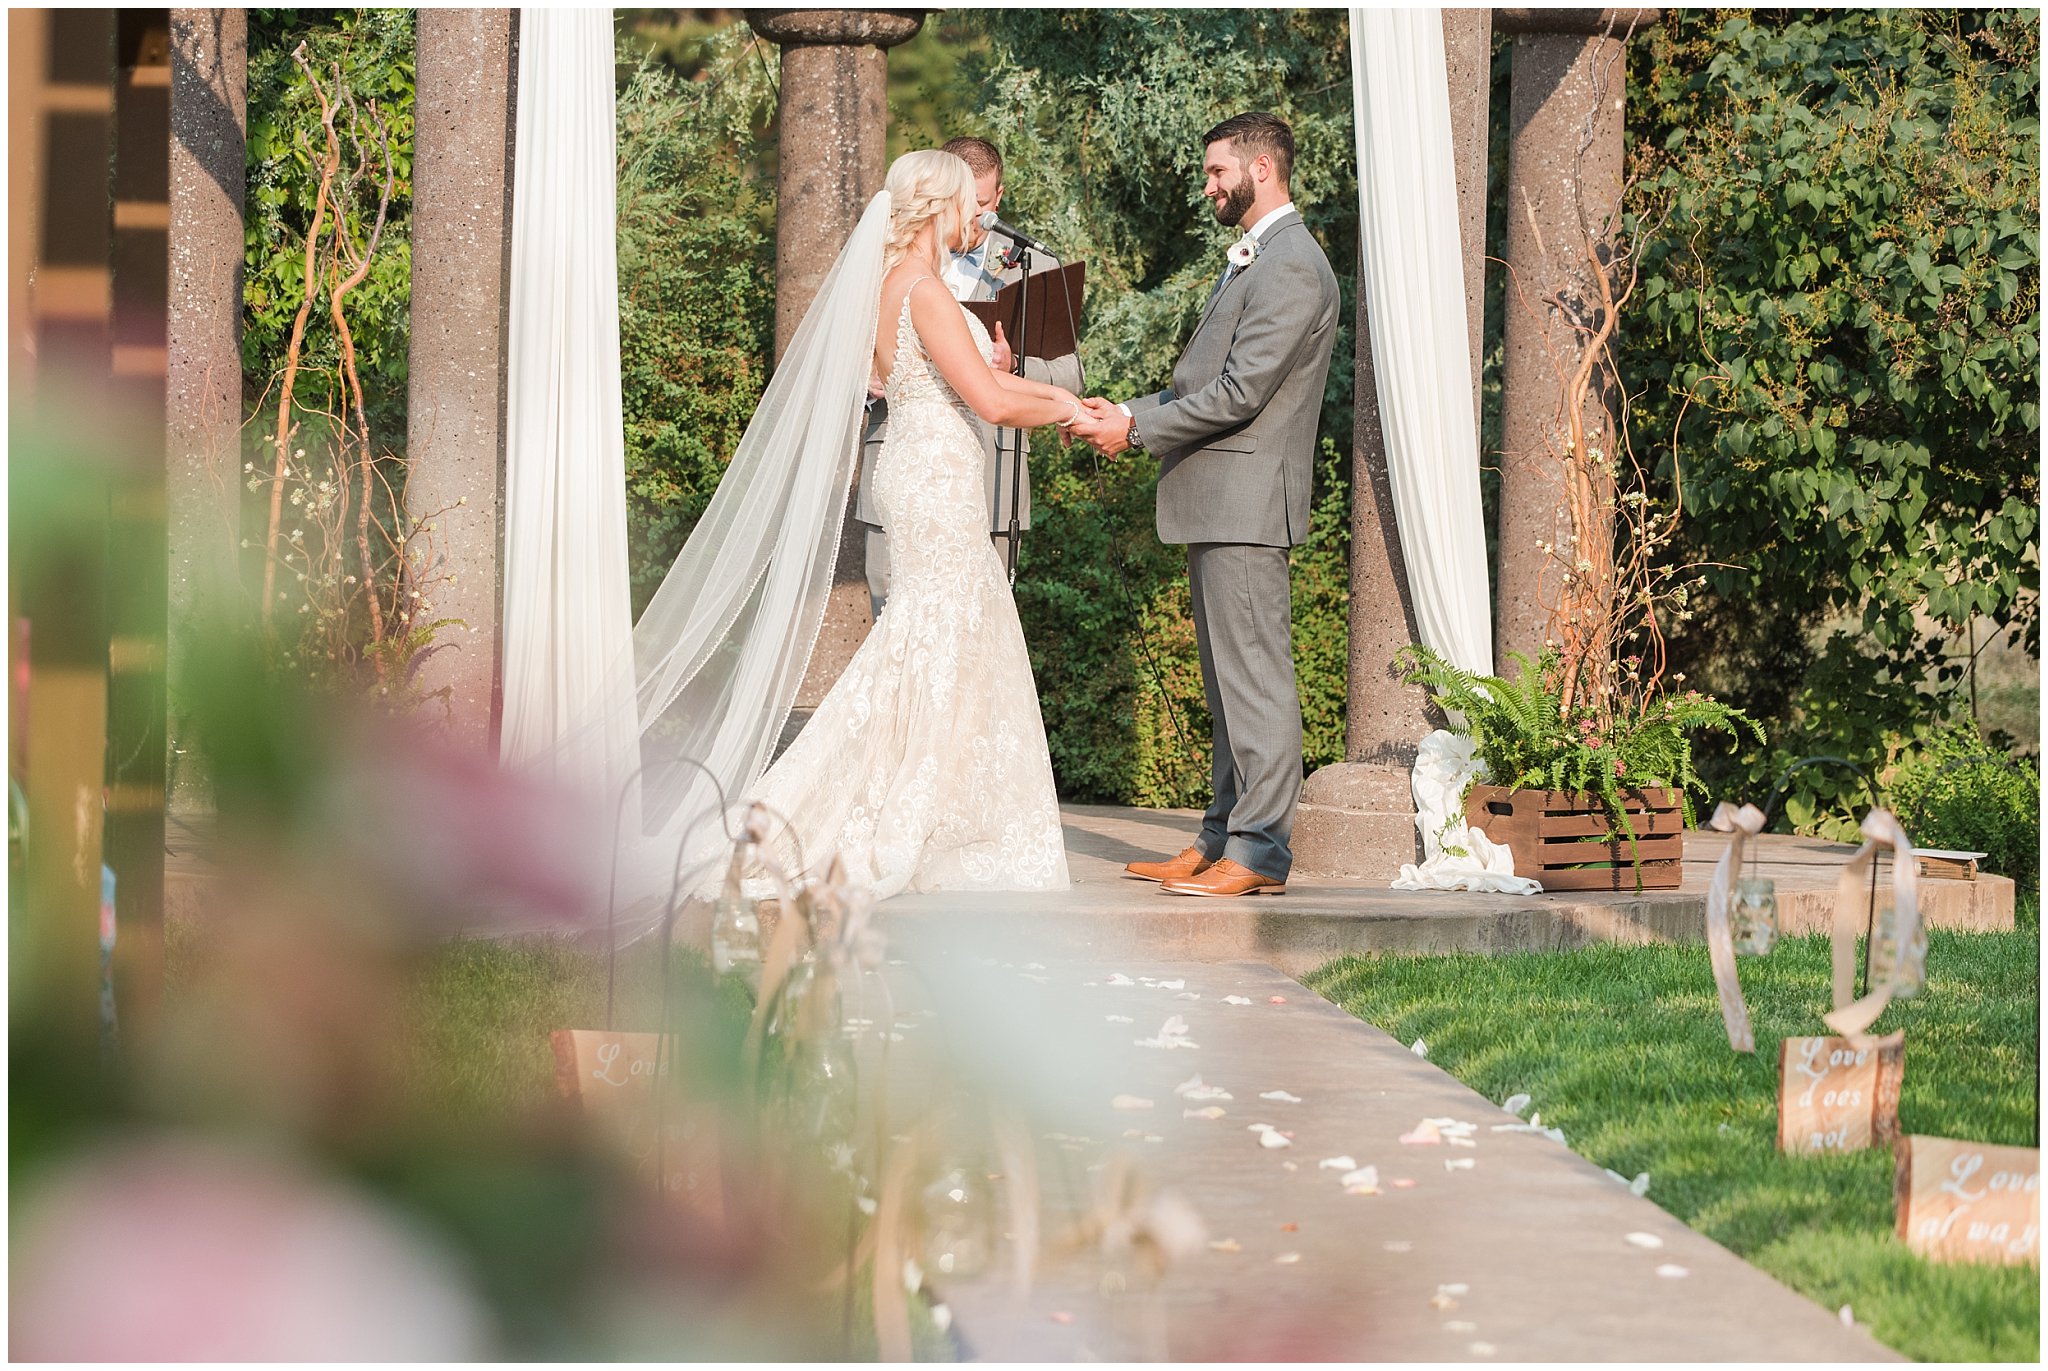 Bride and groom reading vows to each other | Dusty Blue and Rose Summer Wedding at Oak Hills Utah | Jessie and Dallin Photography